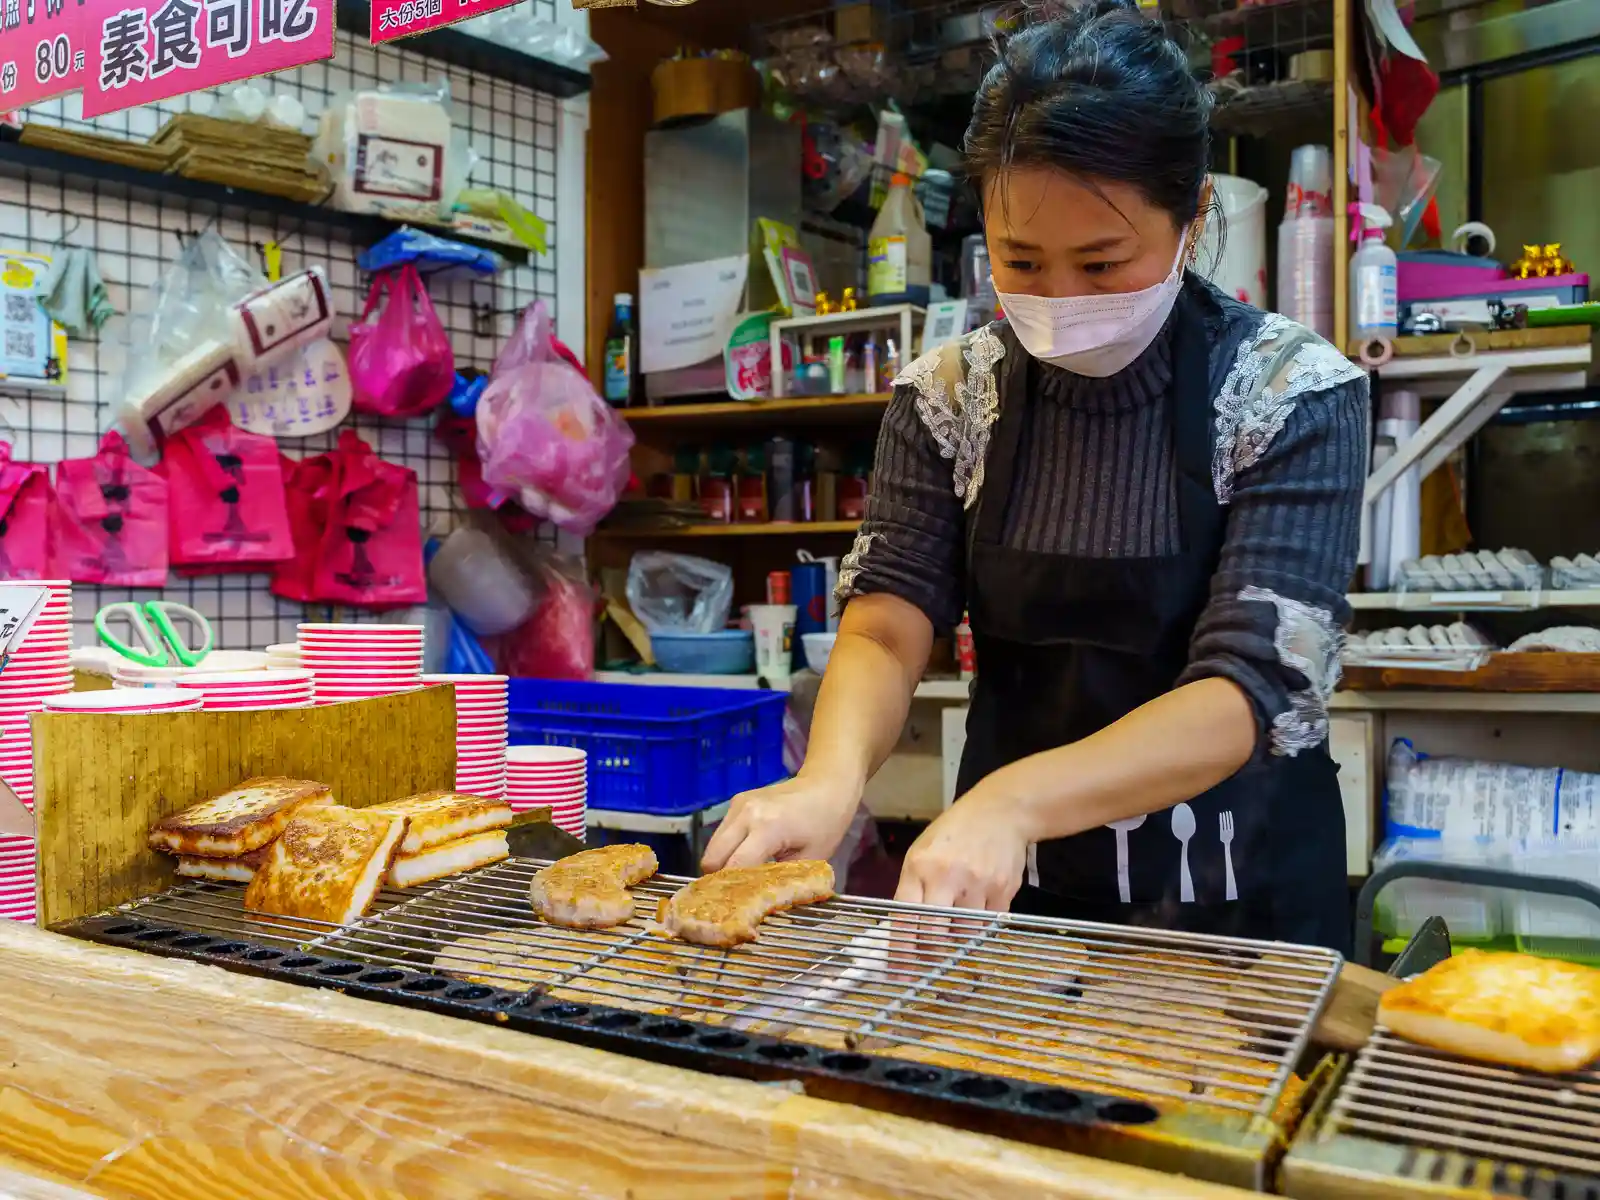 A woman is heating up taro cakes at a stand in the old street.